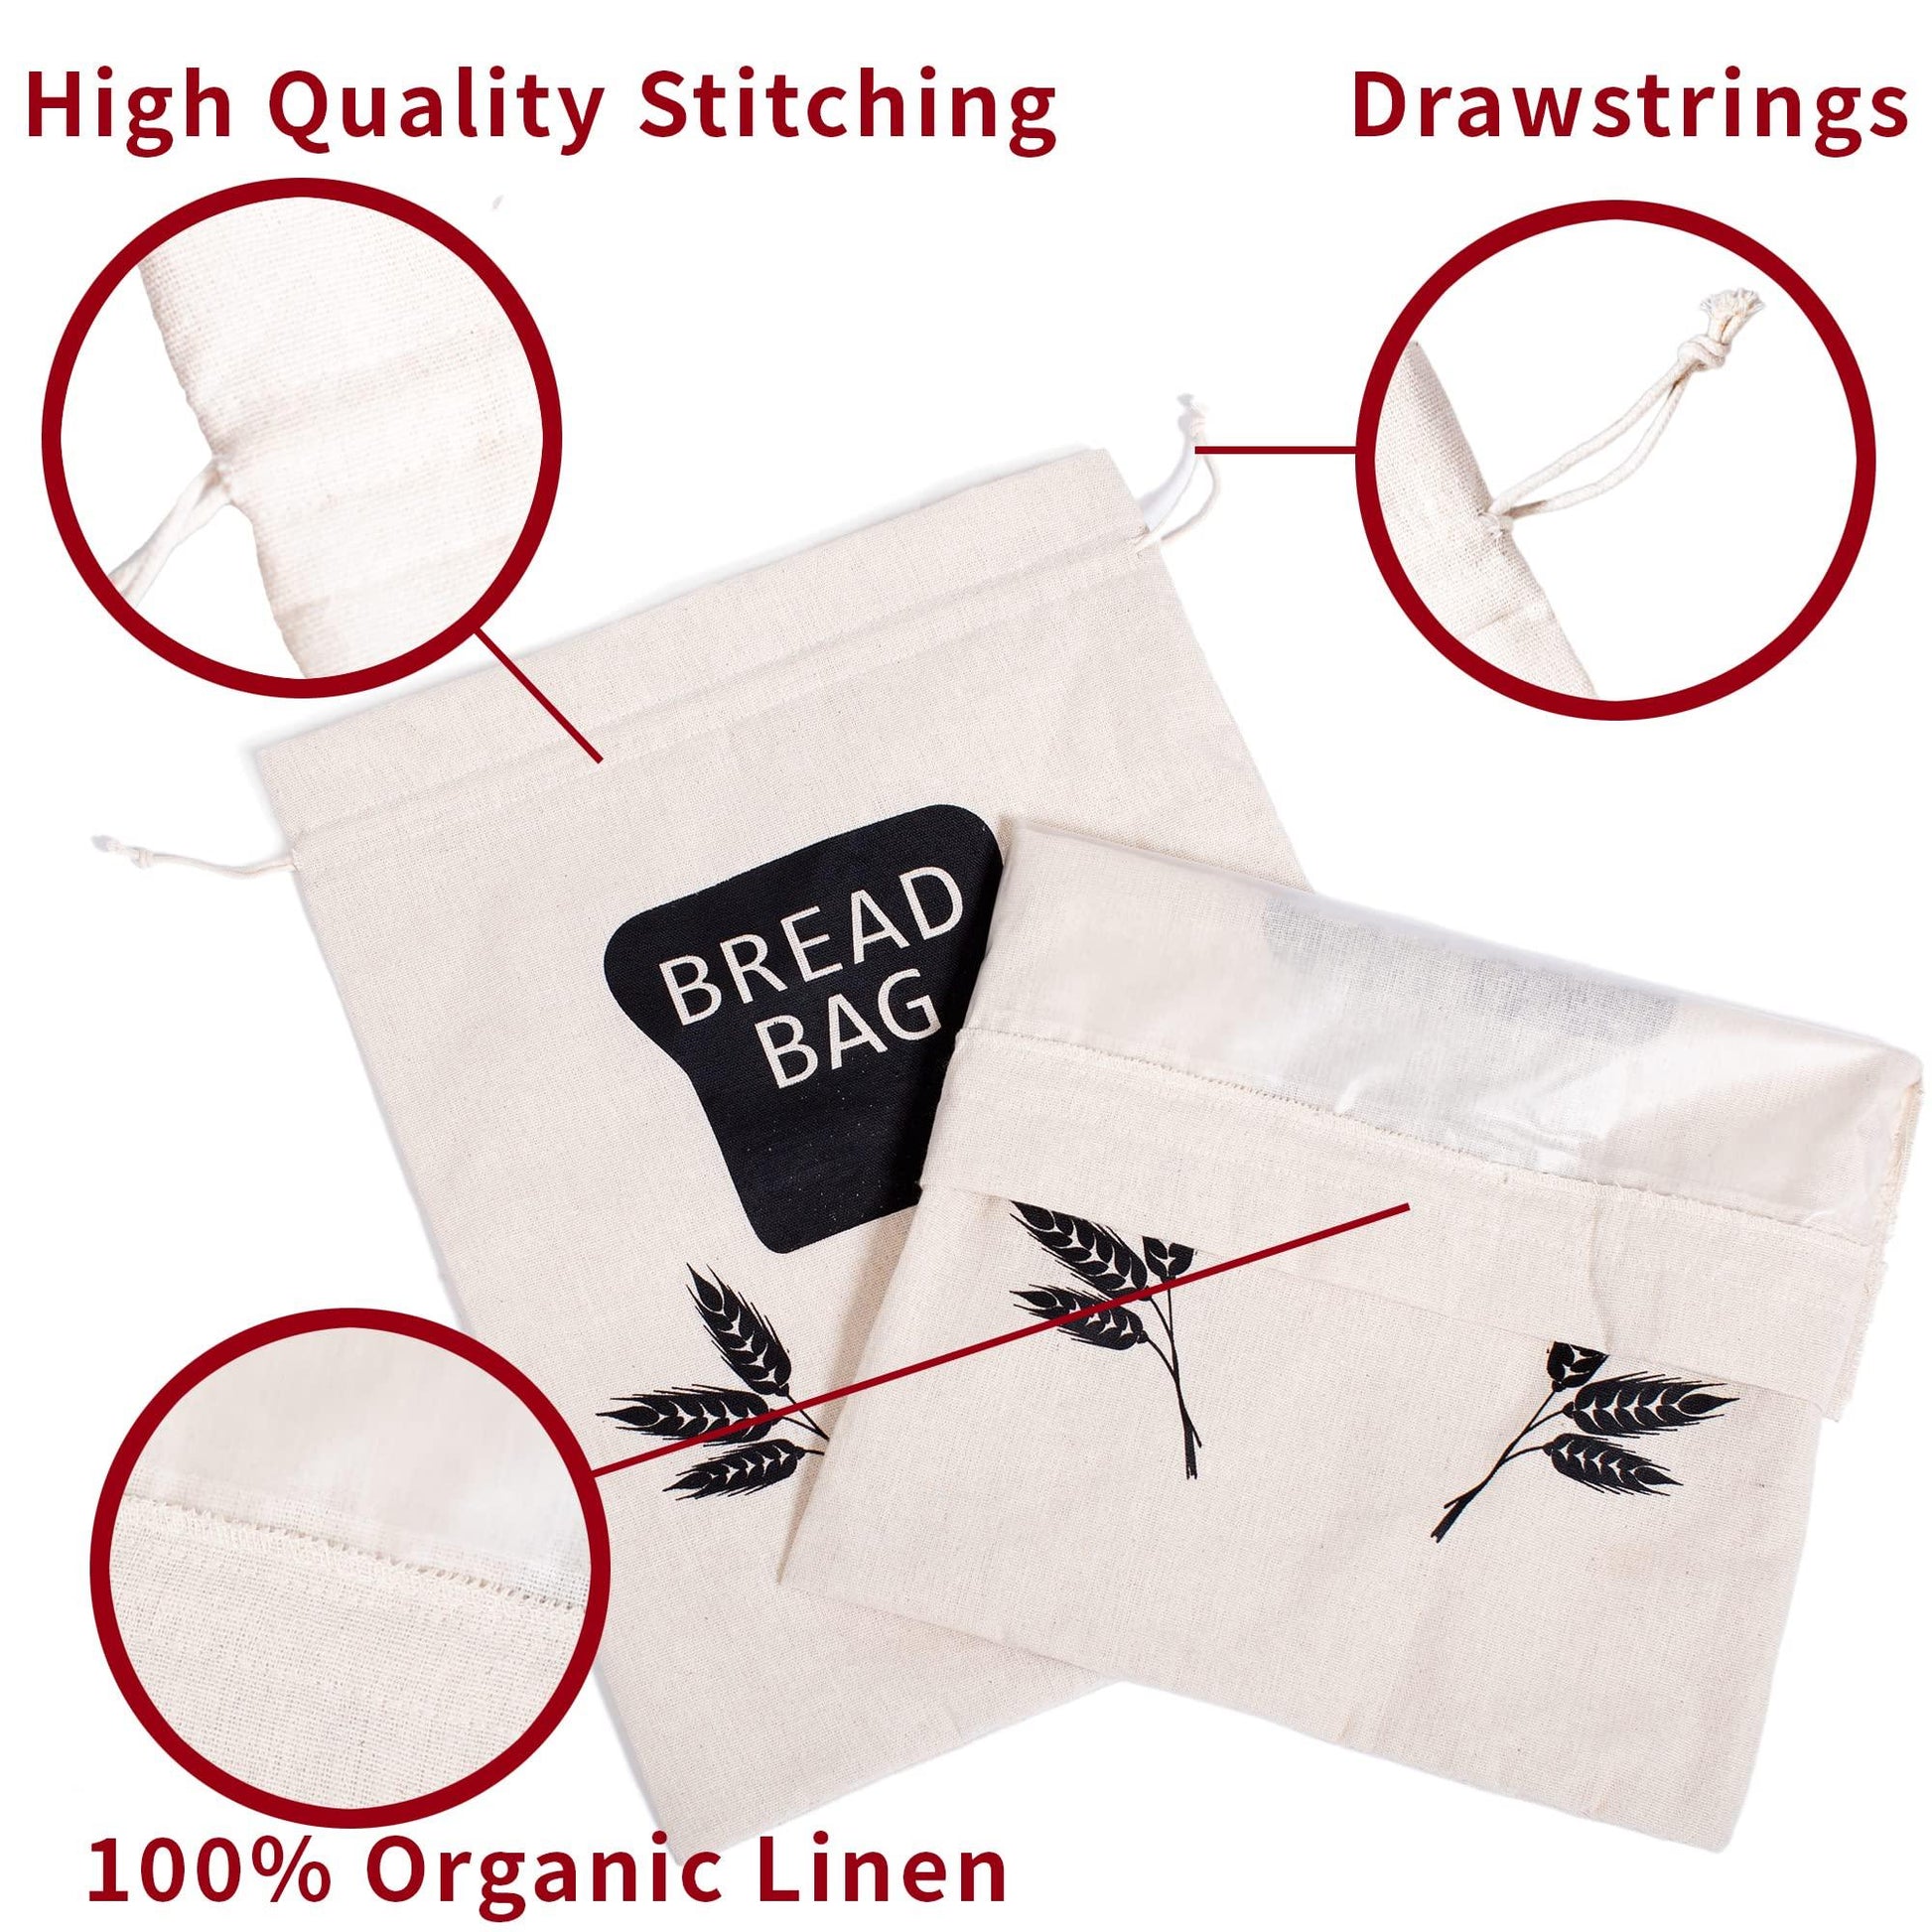 2 X Bread Bags for Homemade Bread - Plastic Lined, Reusable Linen Cloth Saver Bag For Sourdough & Homemade Bread Storage - 17" x 13" XL - CookCave